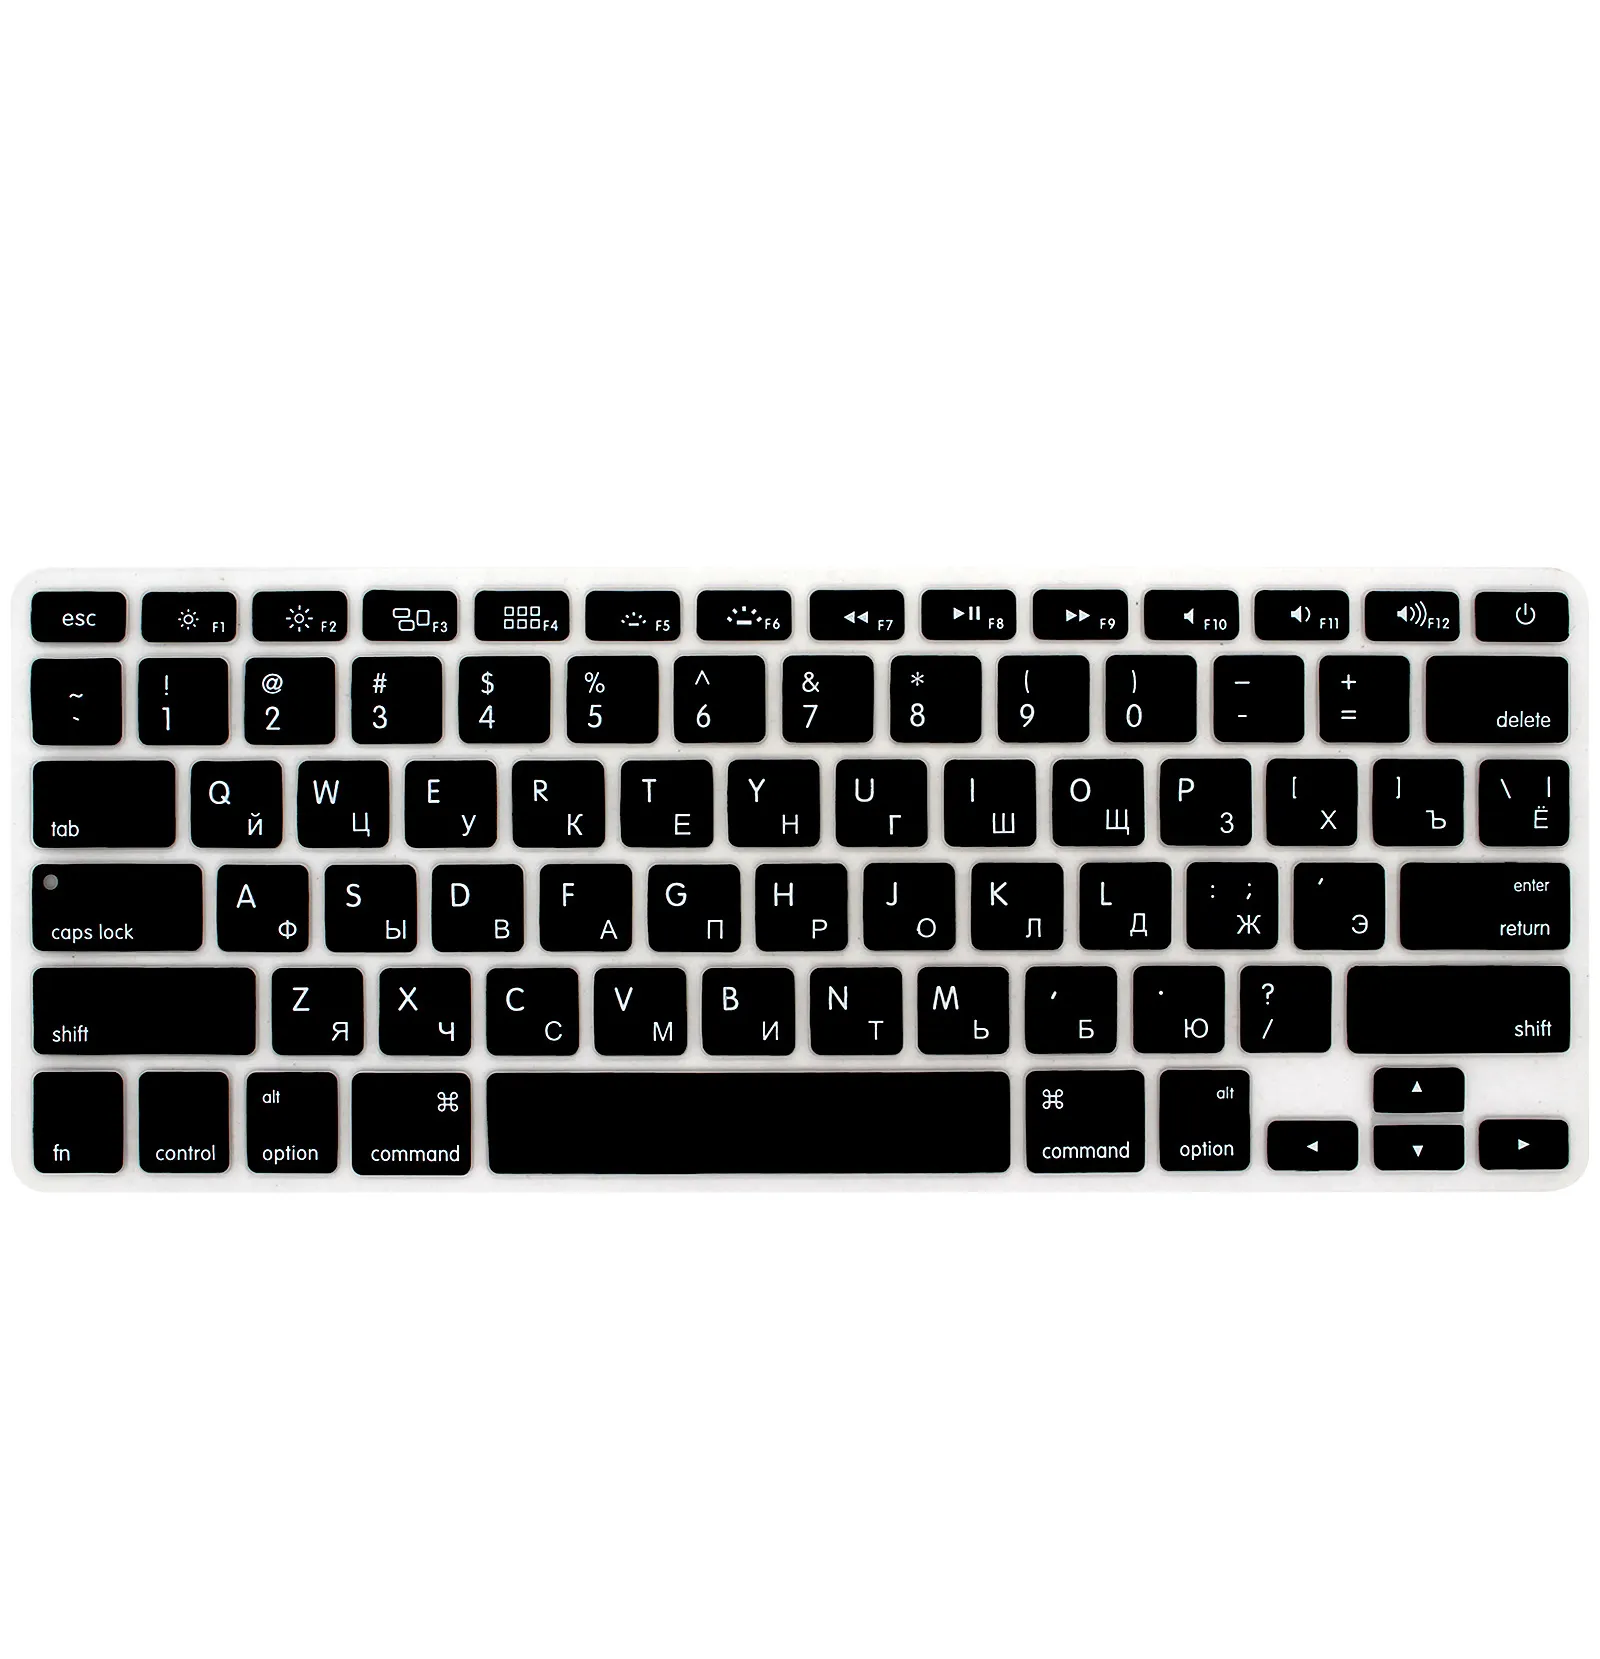 Russian laptop Keyboard Cover Protector film for Russian Russia MacBook Air pro 11 12 13 15 16 inch keyboard cover